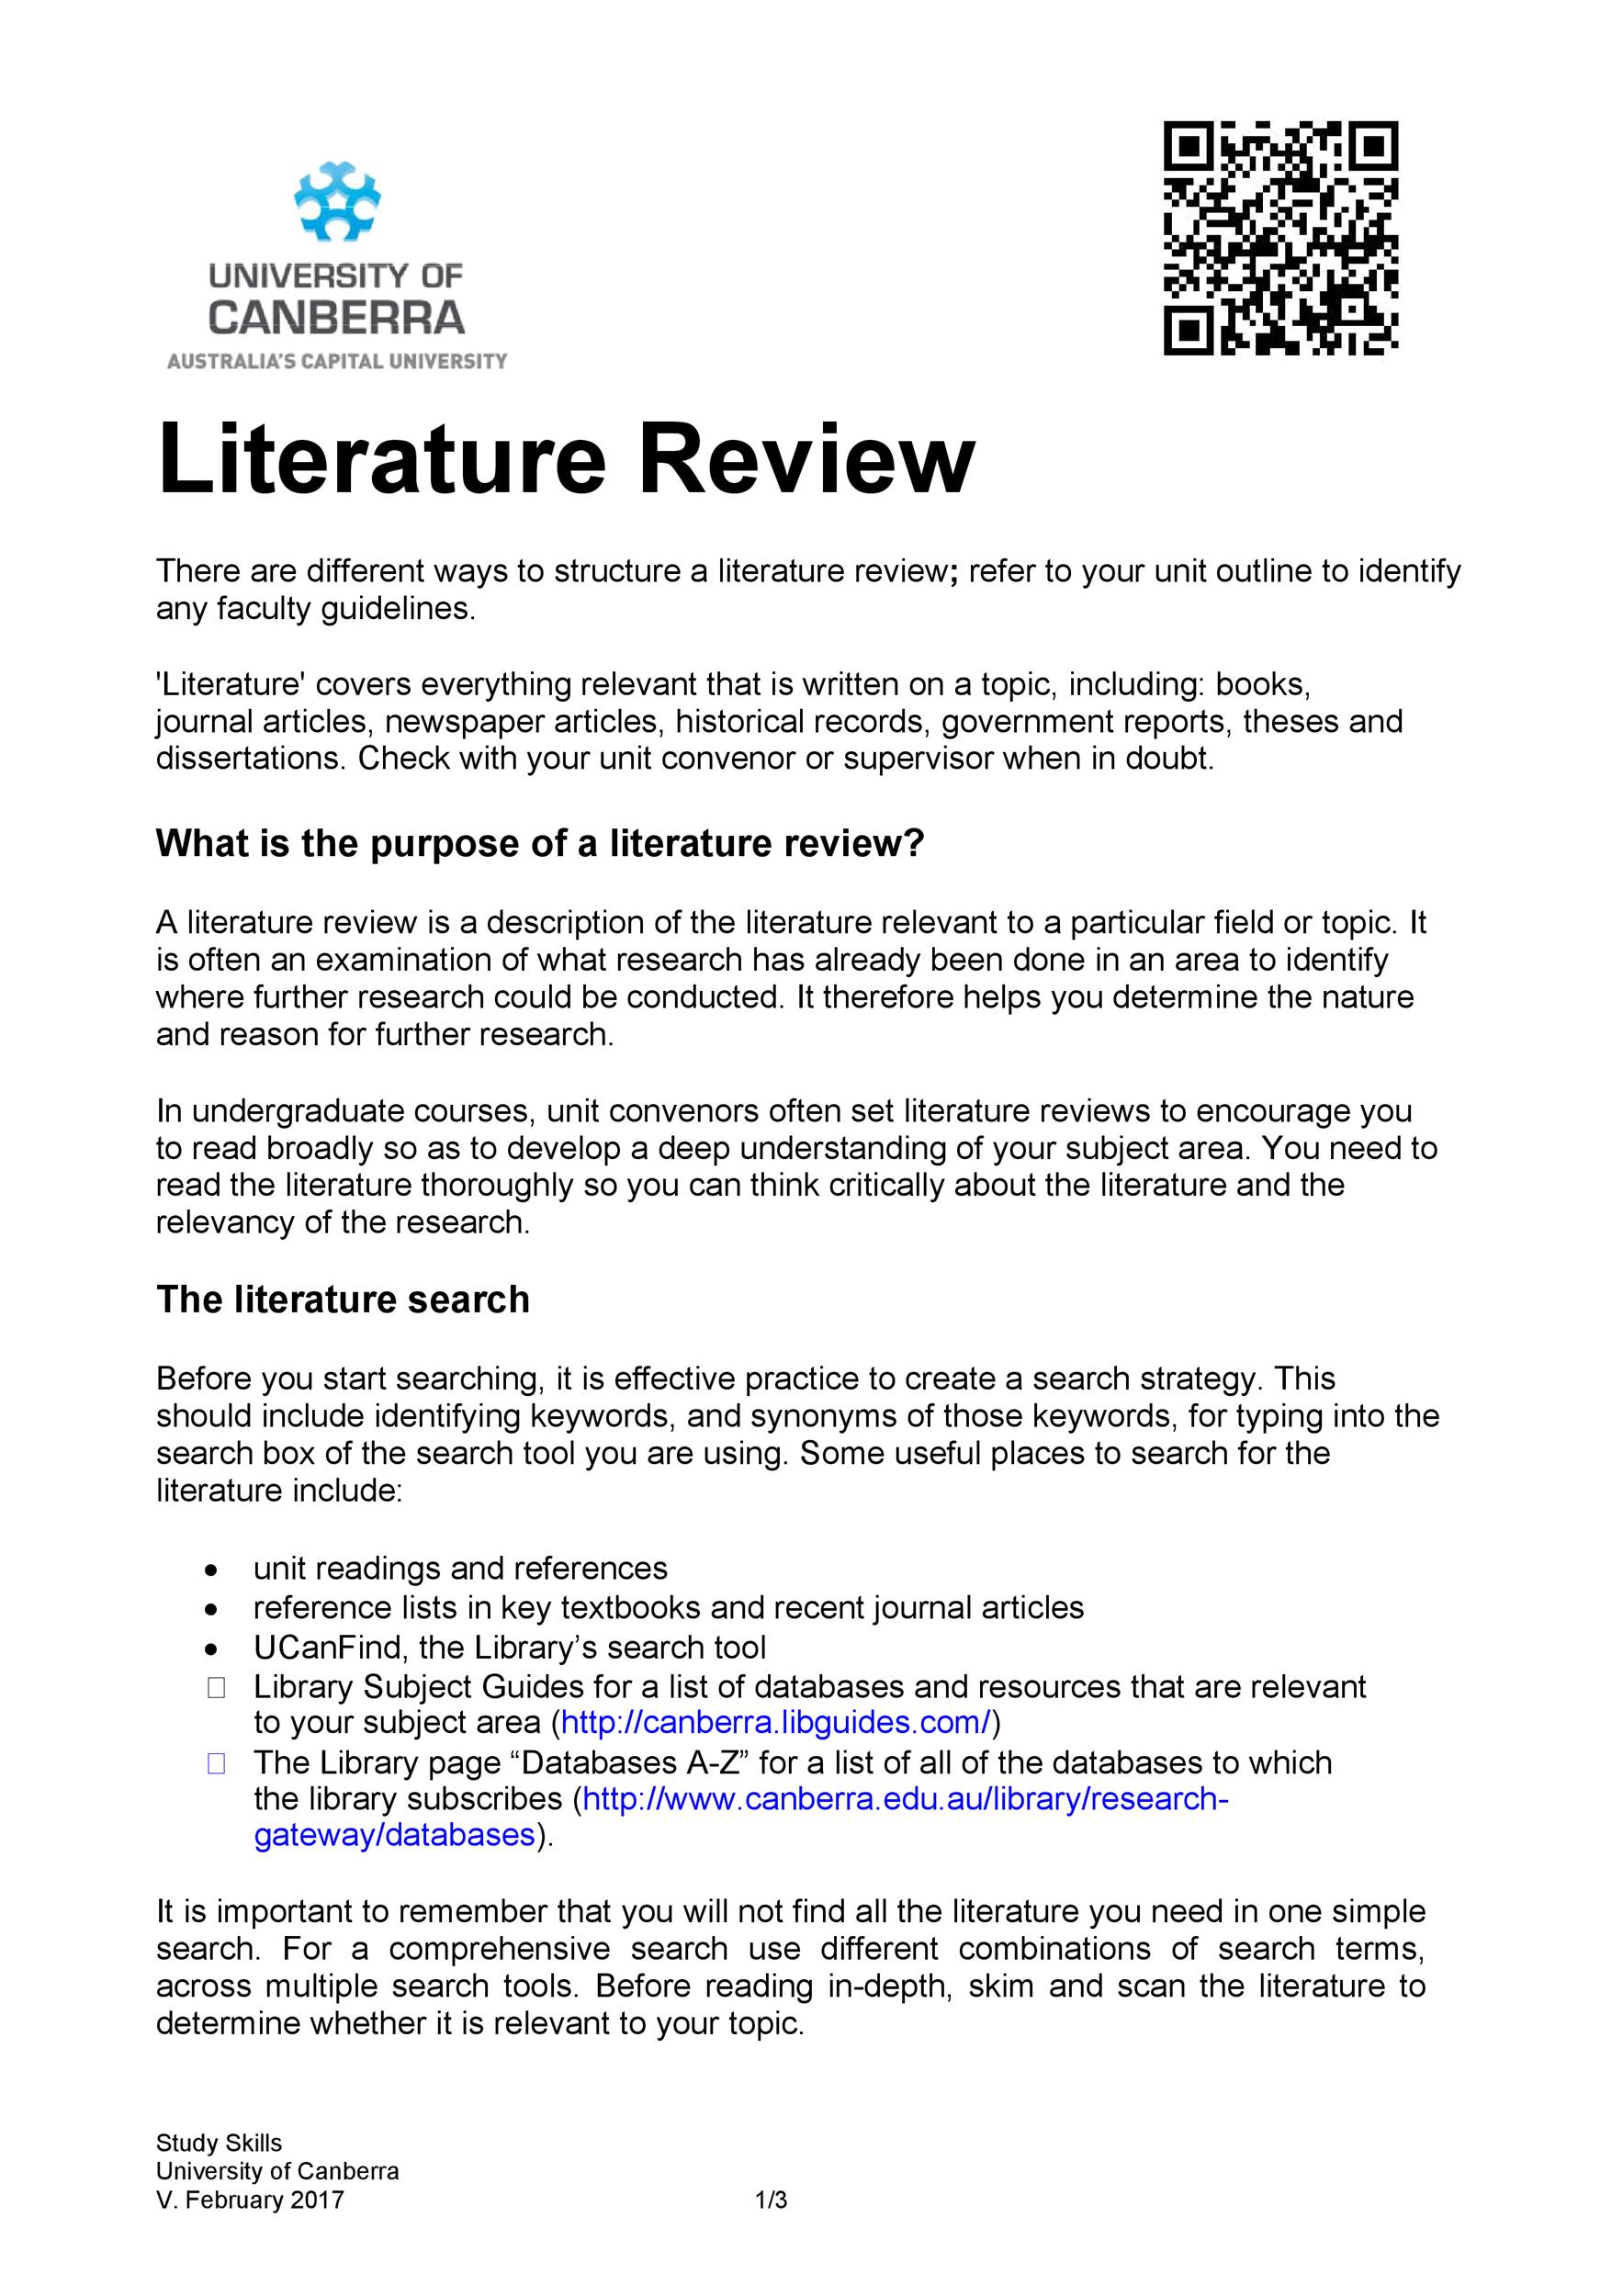 how to write literature review in research paper